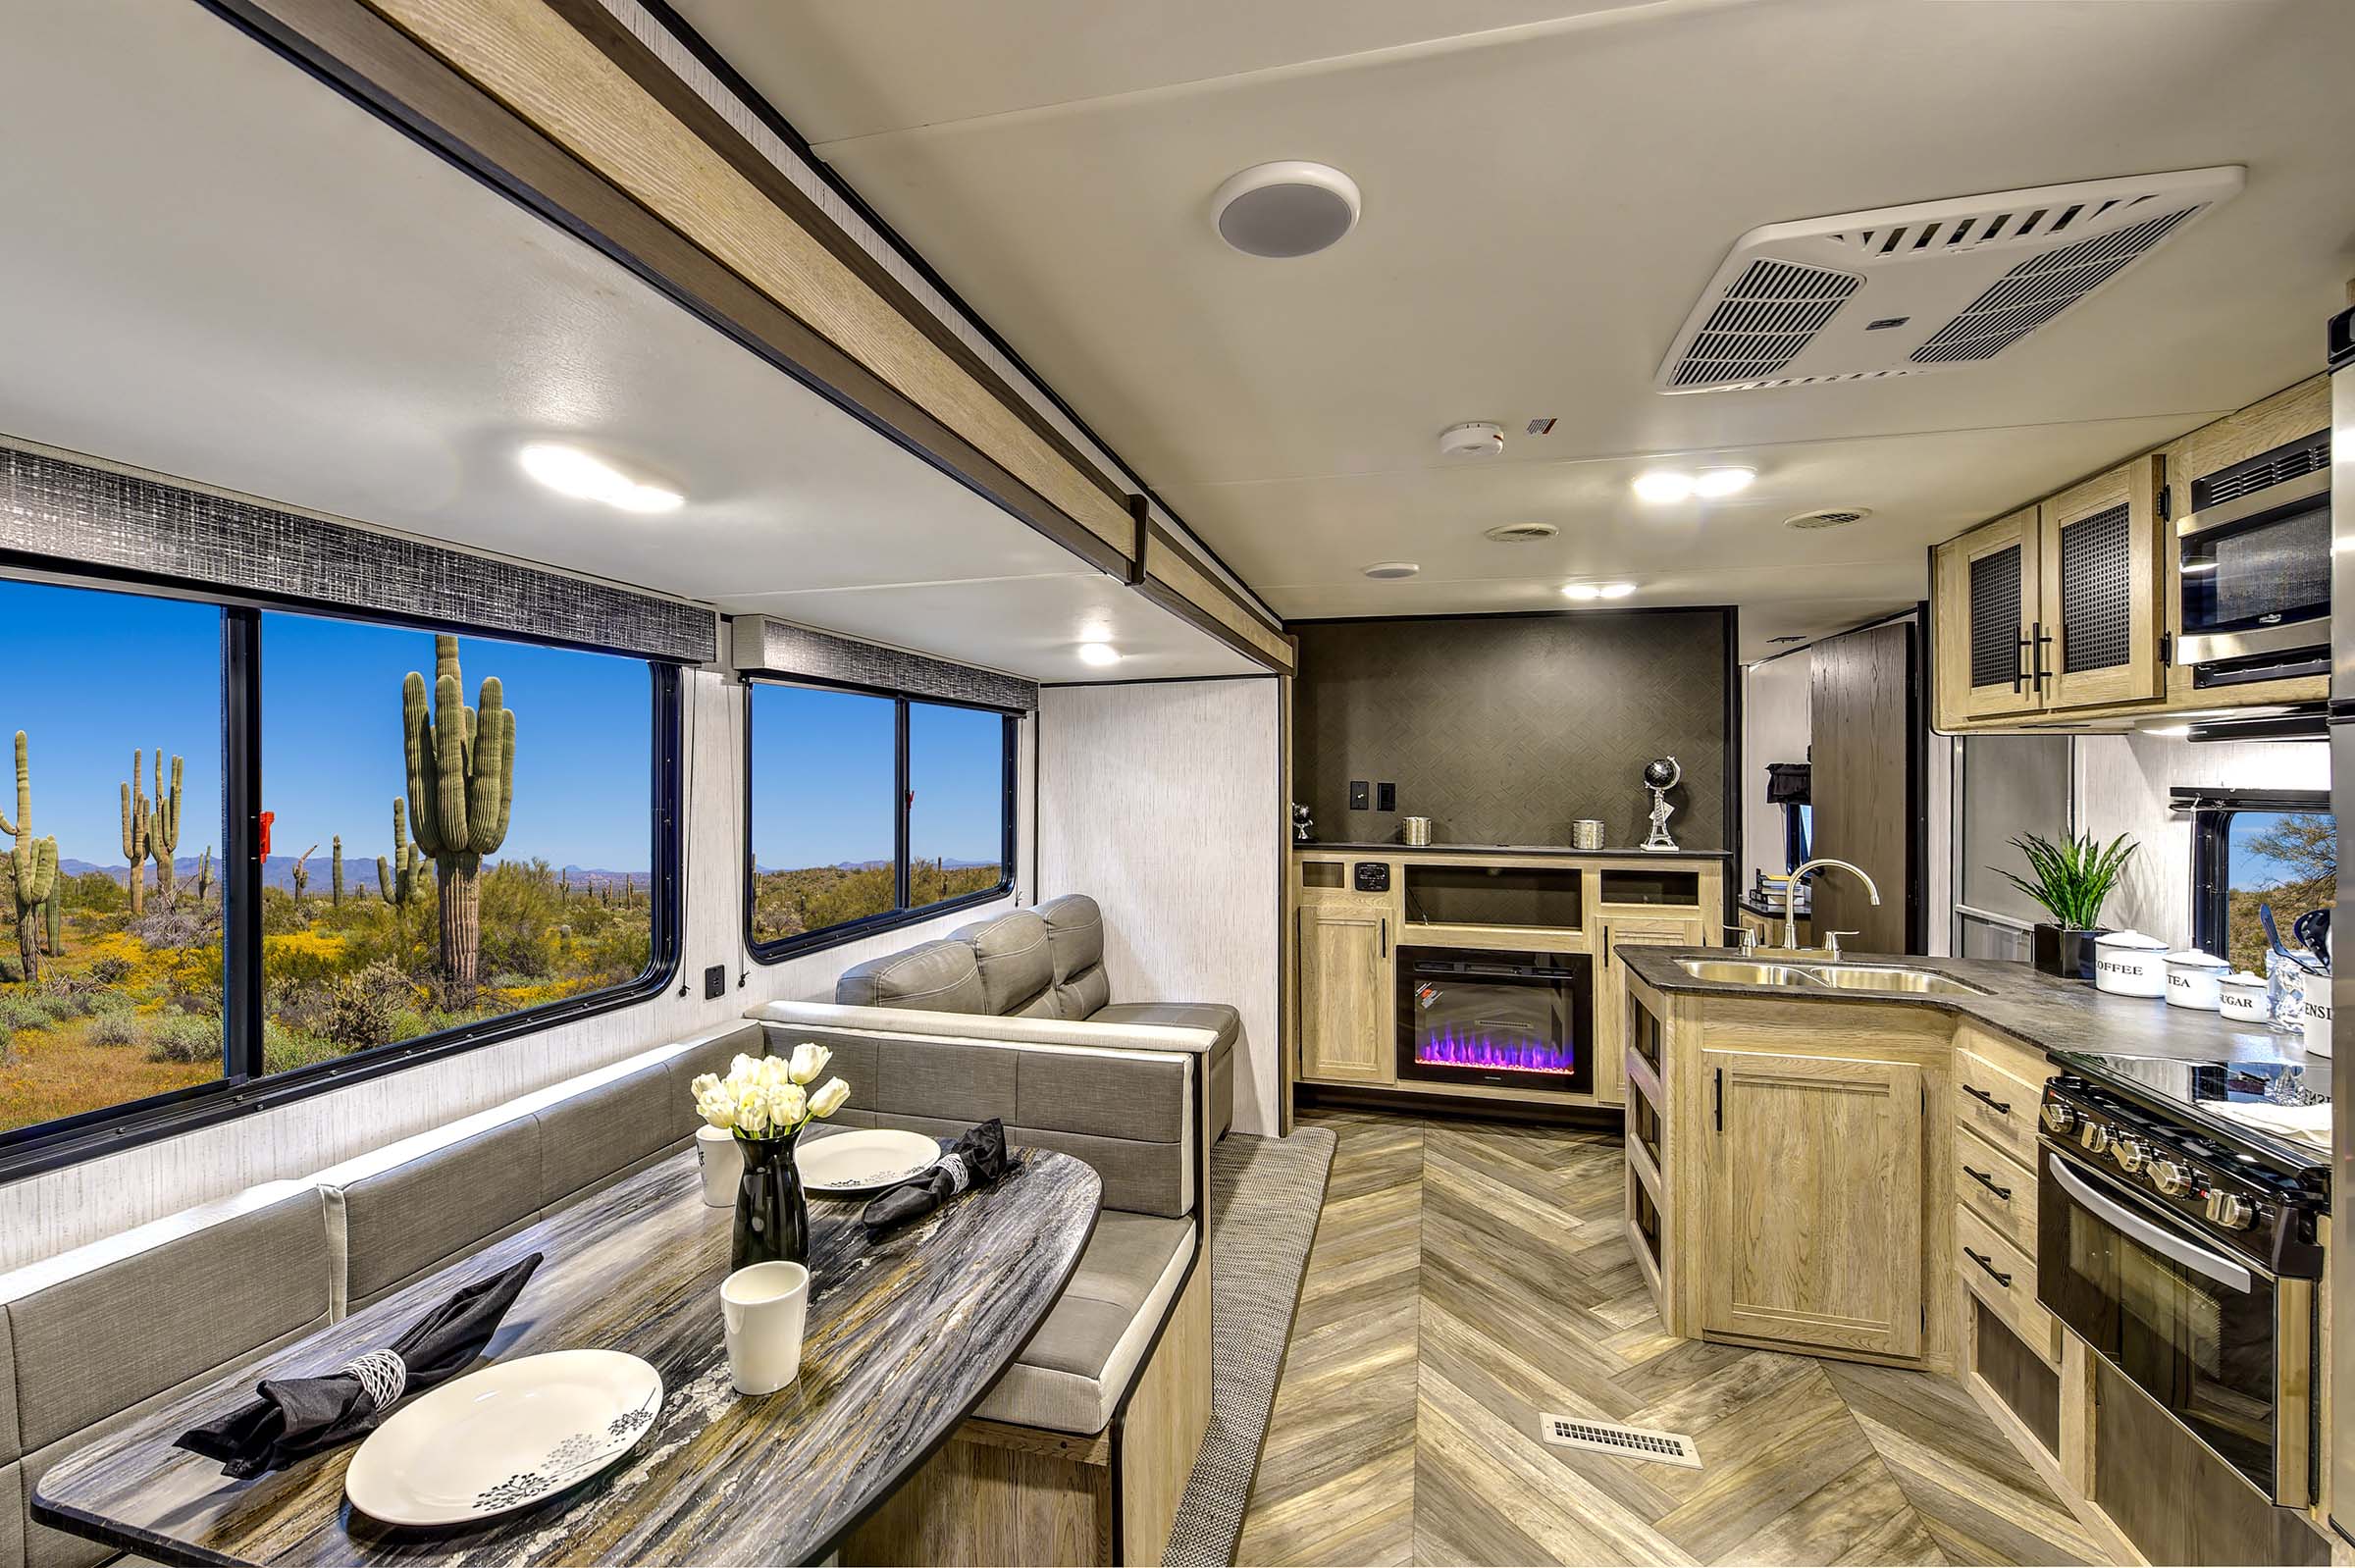 New Prowler Floorplan From Heartland Seeks To Convert As Many Rv Possible Autoevolution